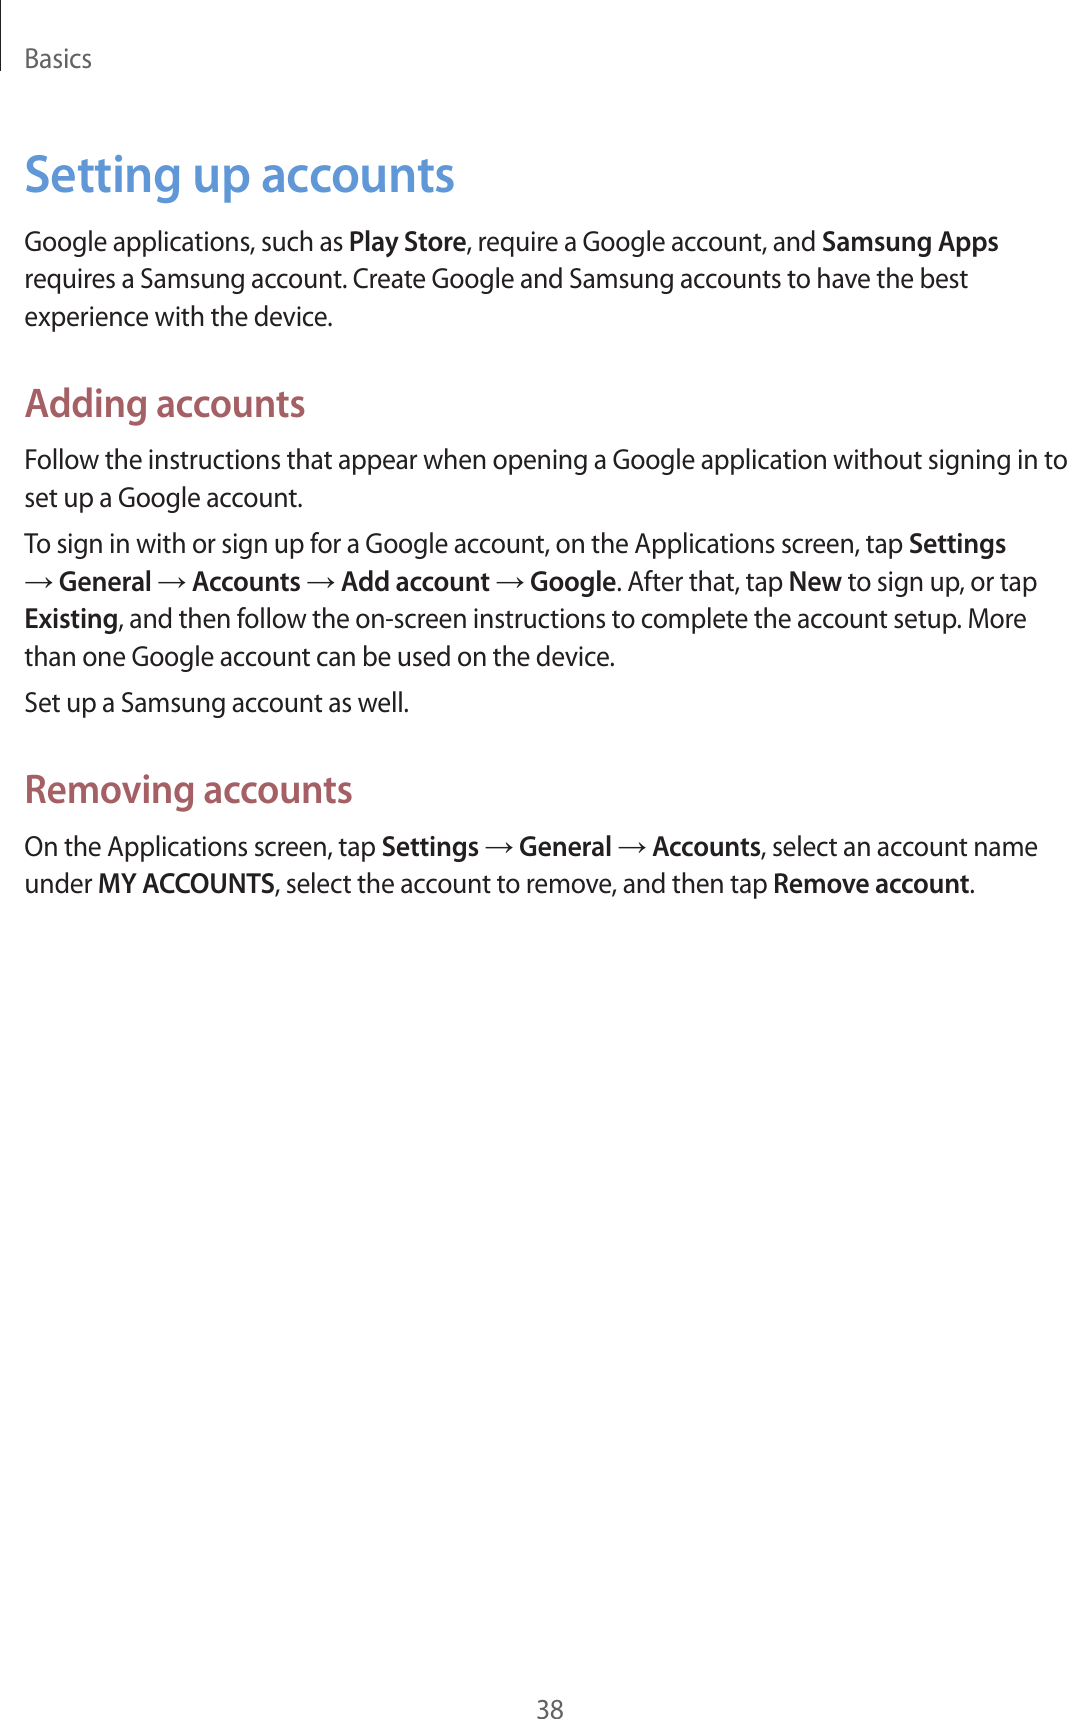 Basics38Setting up accountsGoogle applications, such as Play Store, require a Google account, and Samsung Apps requires a Samsung account. Create Google and Samsung accounts to have the best experience with the device.Adding accountsFollow the instructions that appear when opening a Google application without signing in to set up a Google account.To sign in with or sign up for a Google account, on the Applications screen, tap Settings → General → Accounts → Add account → Google. After that, tap New to sign up, or tap Existing, and then follow the on-screen instructions to complete the account setup. More than one Google account can be used on the device.Set up a Samsung account as well.Removing accountsOn the Applications screen, tap Settings → General → Accounts, select an account name under MY ACCOUNTS, select the account to remove, and then tap Remove account.